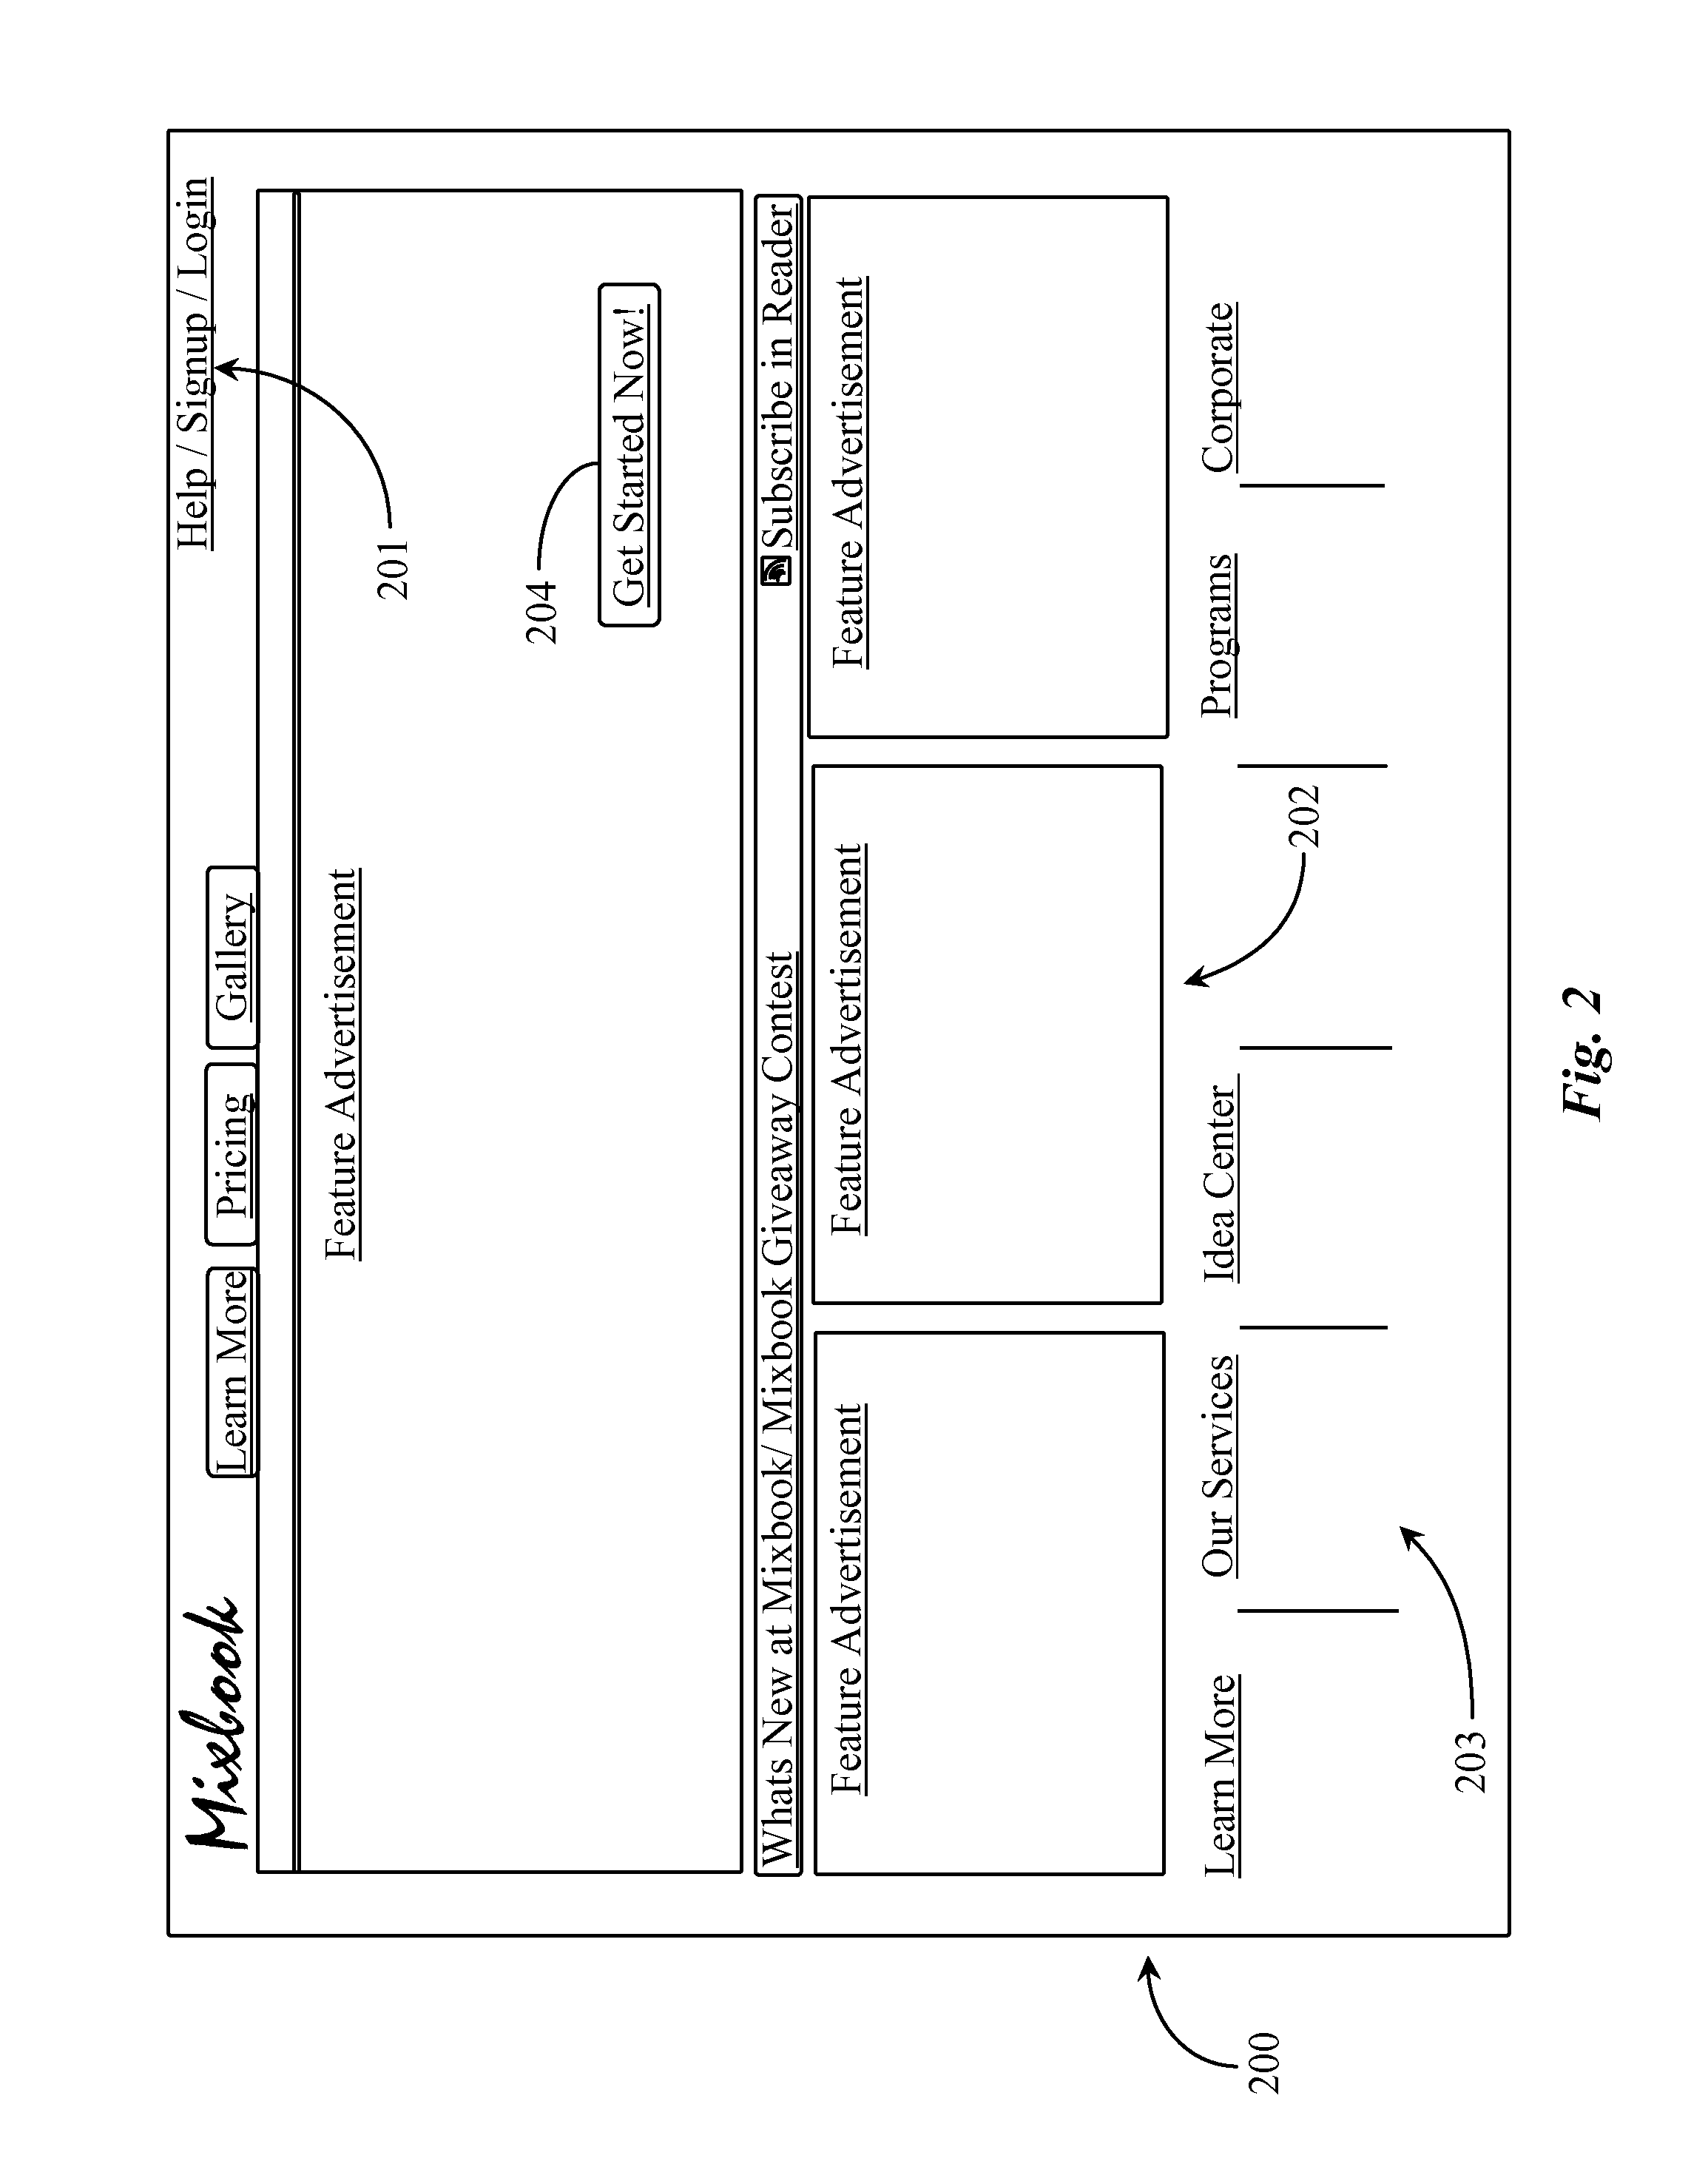 System and Methods for Creating and Editing Photo-Based Projects on a Digital Network